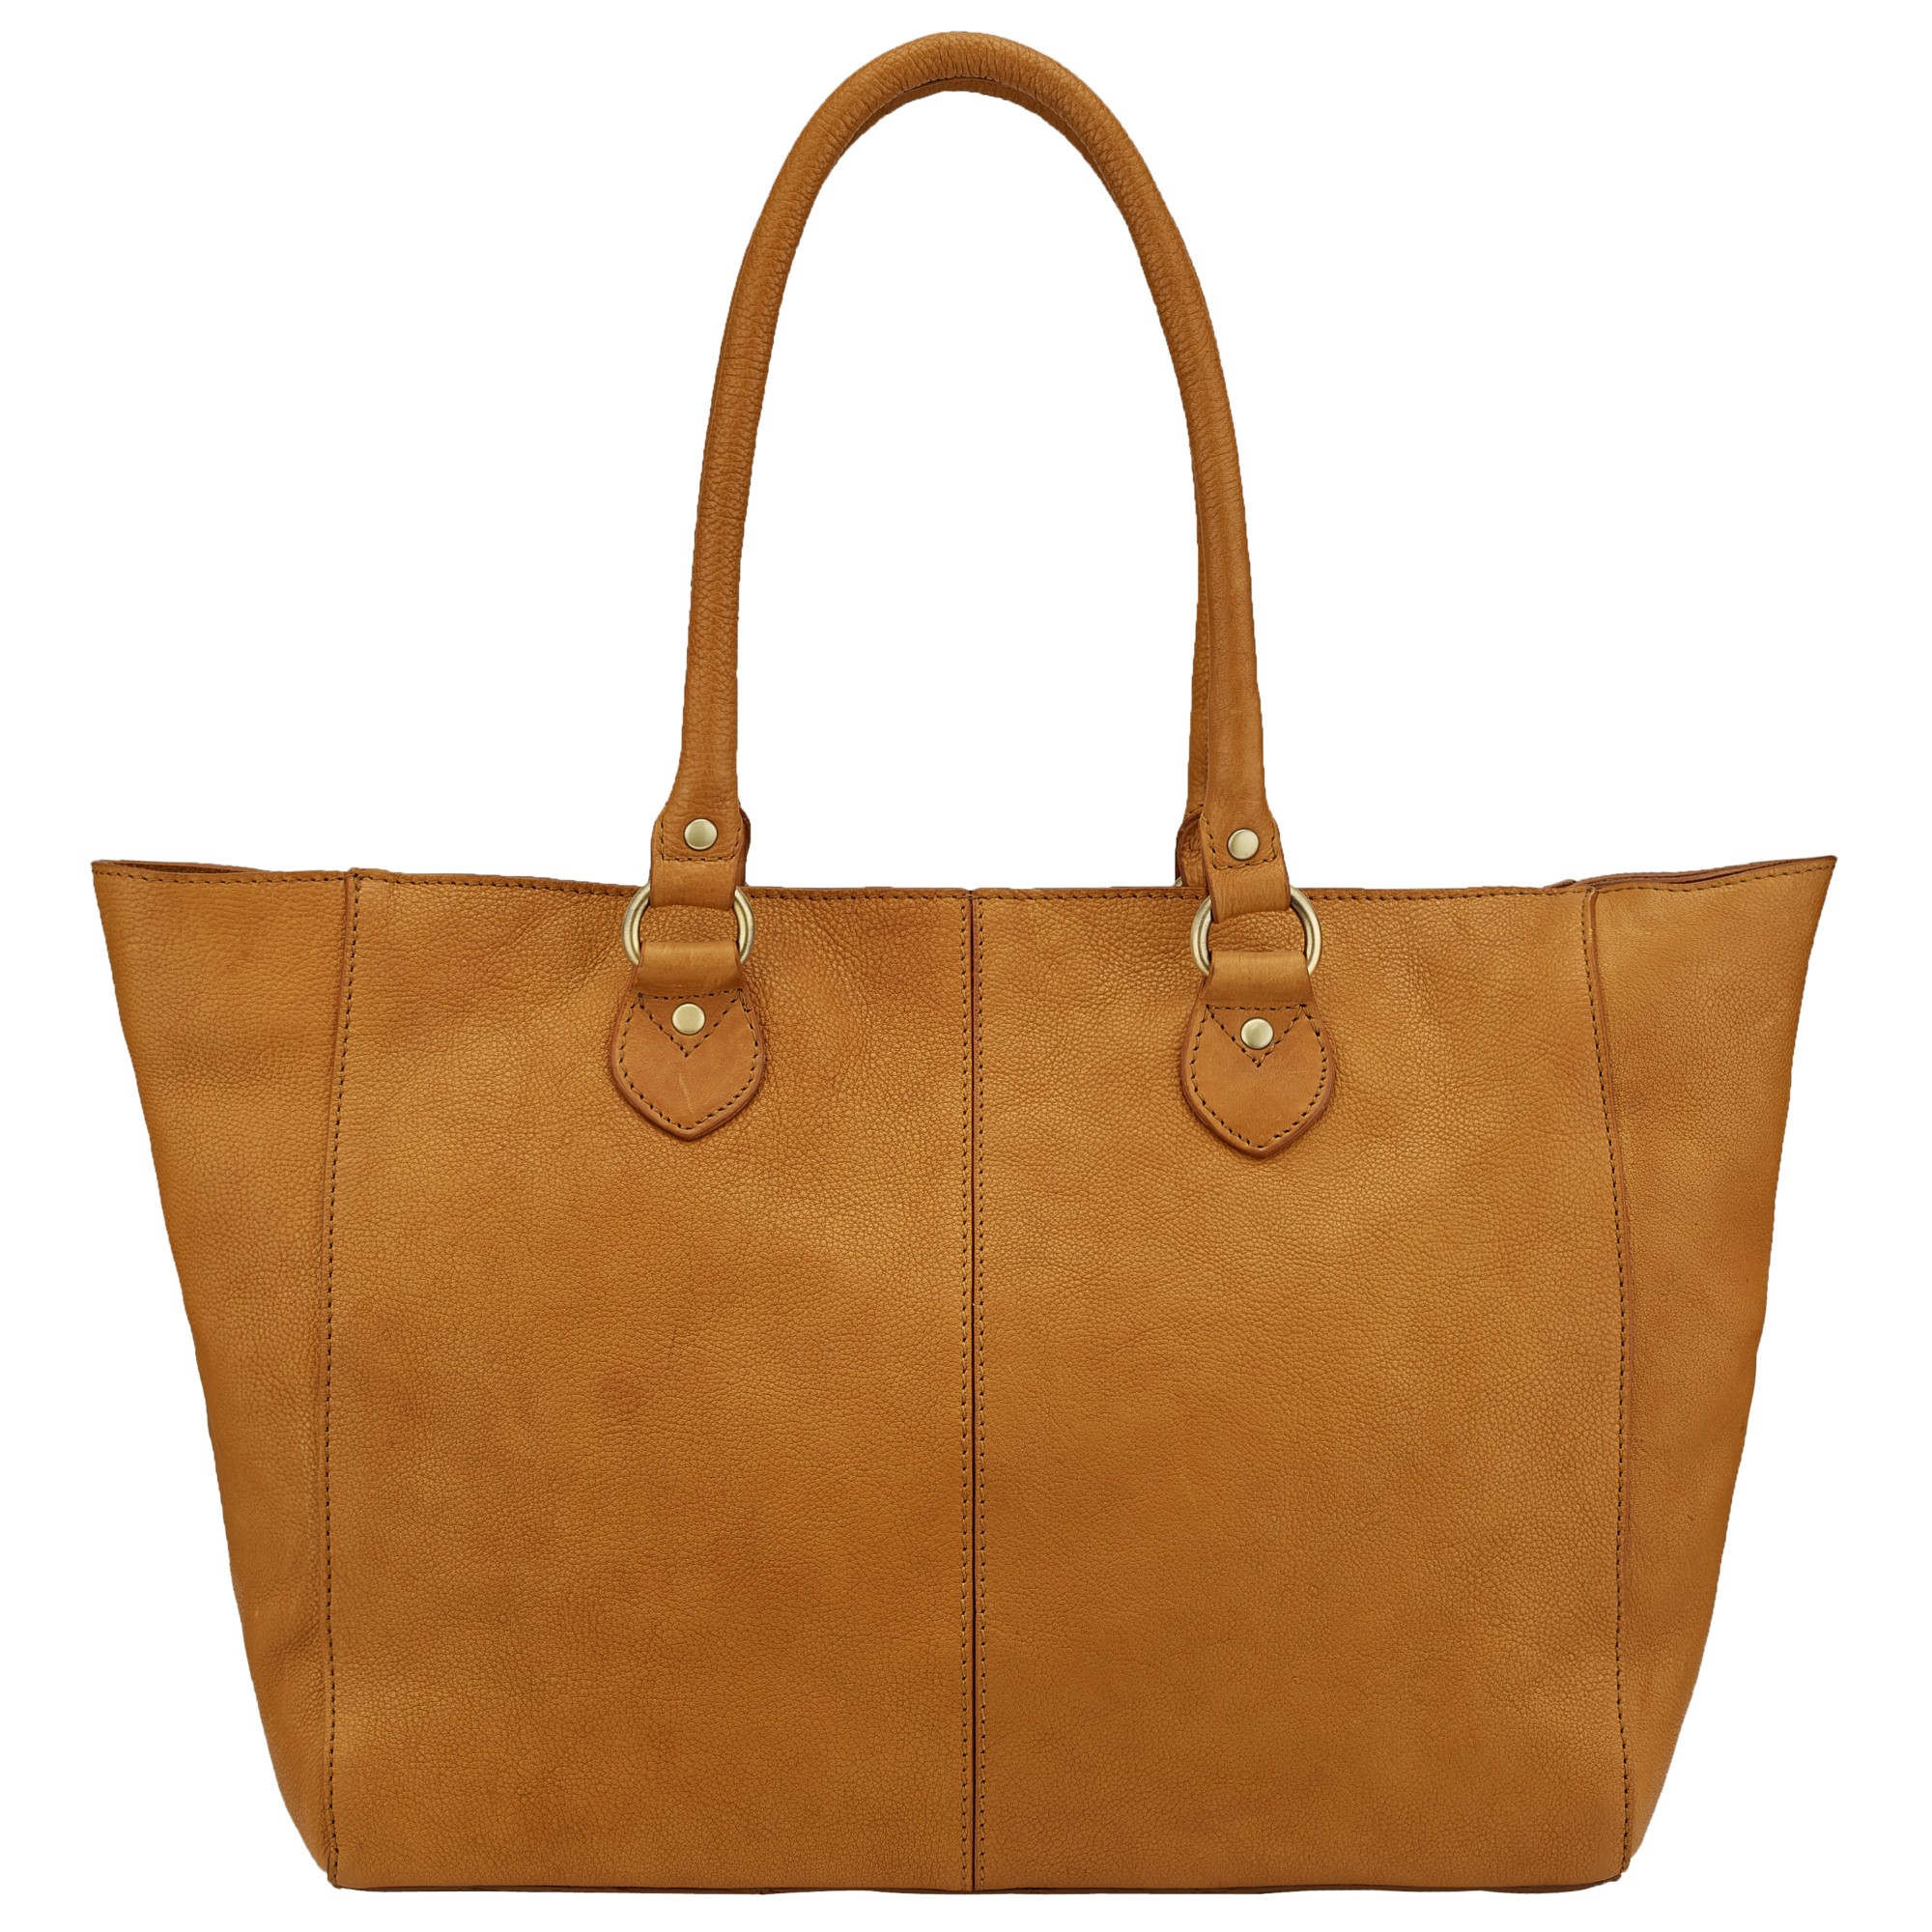 John Lewis Winchester Large Leather Tote Bag in Tan (Brown) - Lyst